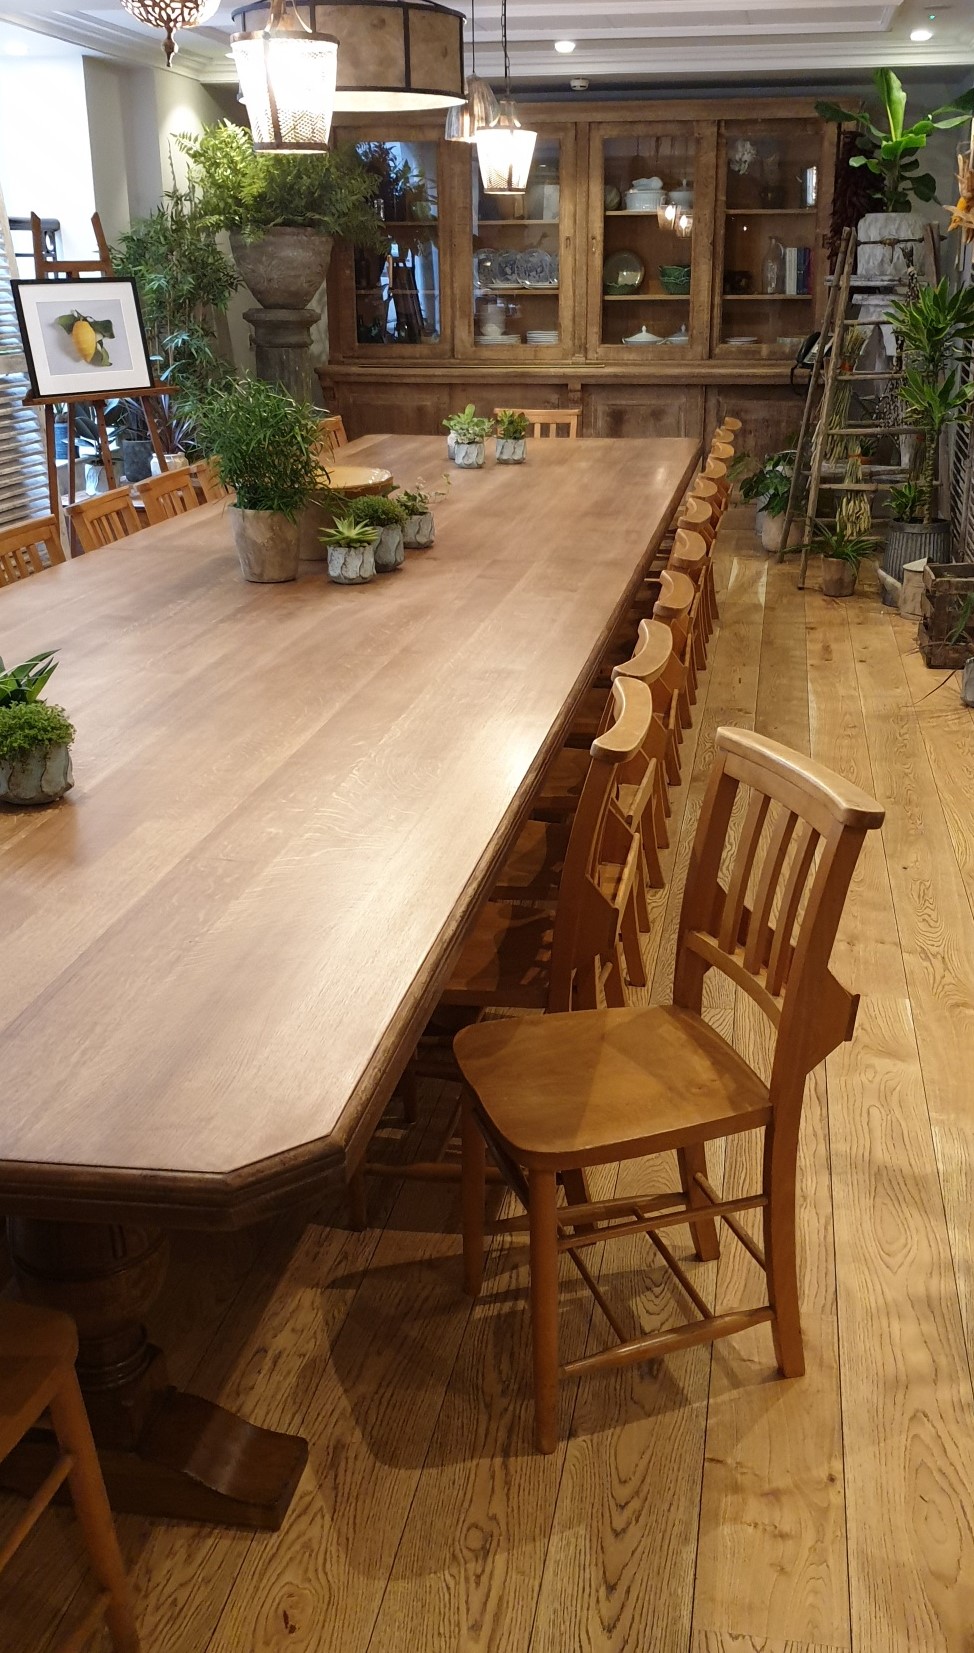 Victorian Church chairs used around kitchen or dining room tables. Buy old wooden Church chairs from UKAA. Old Chapel chairs are ideal for traditional homes